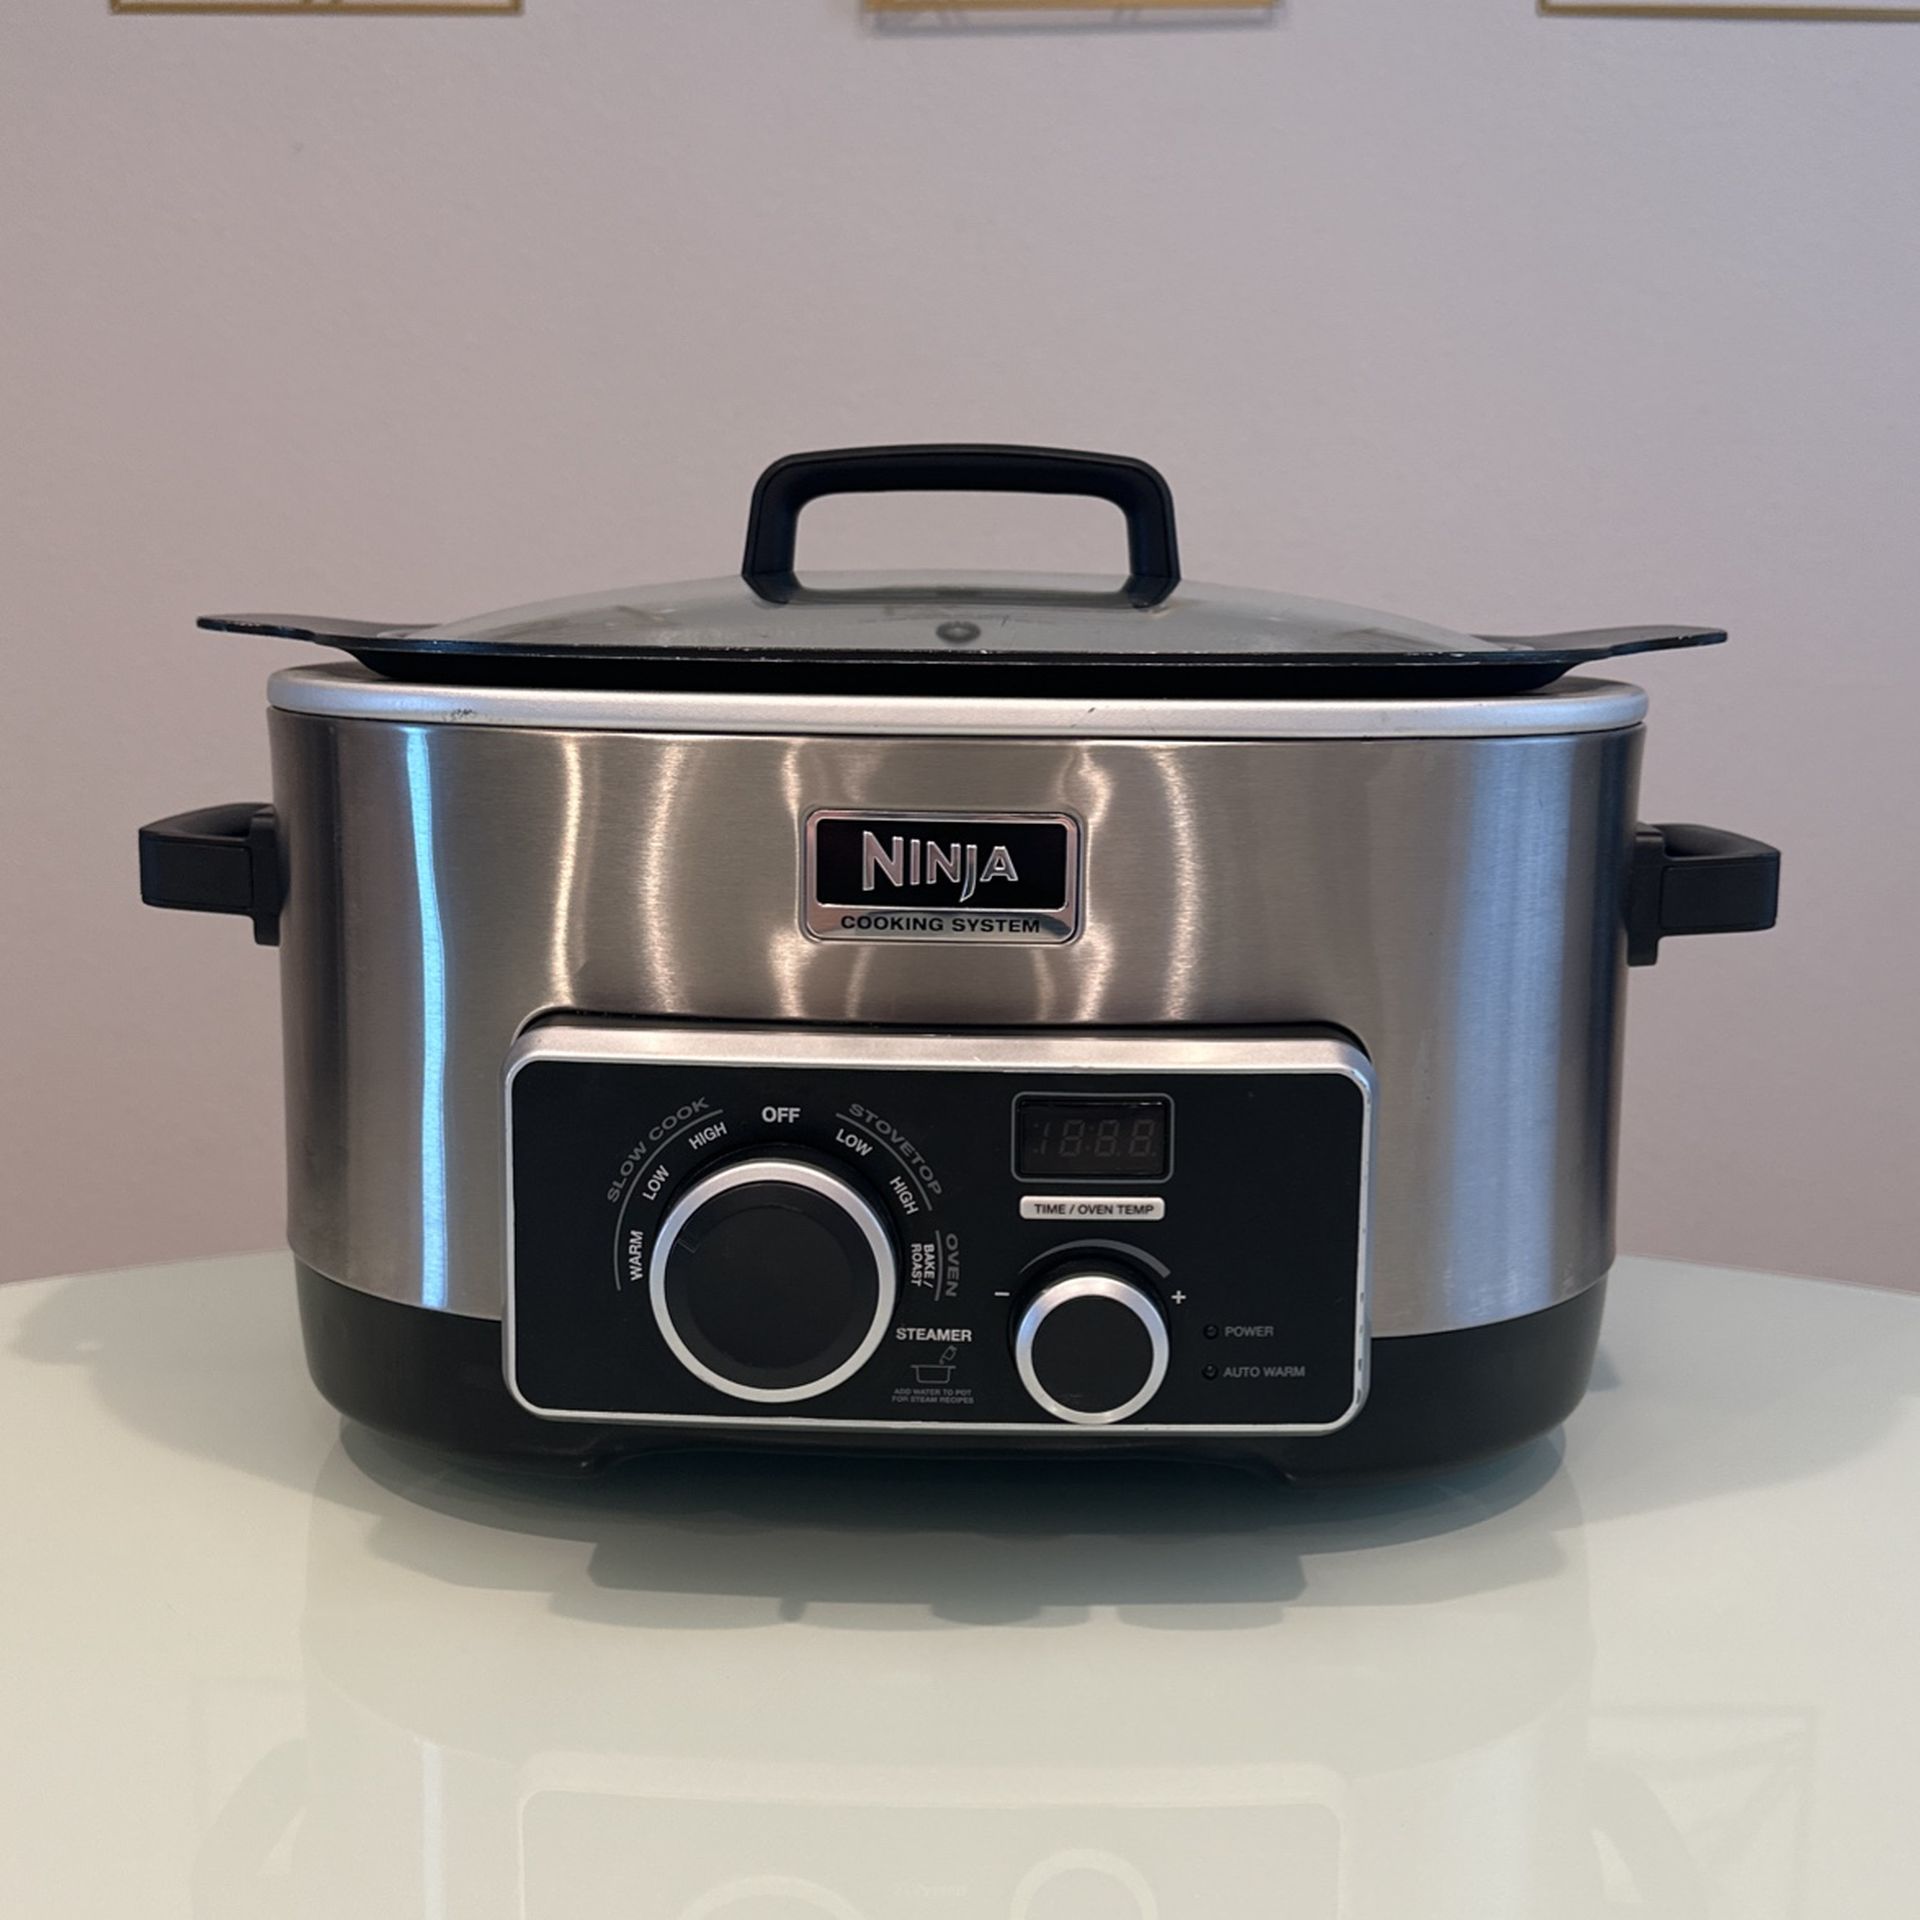 Ninja 4-in-1 Cooking System